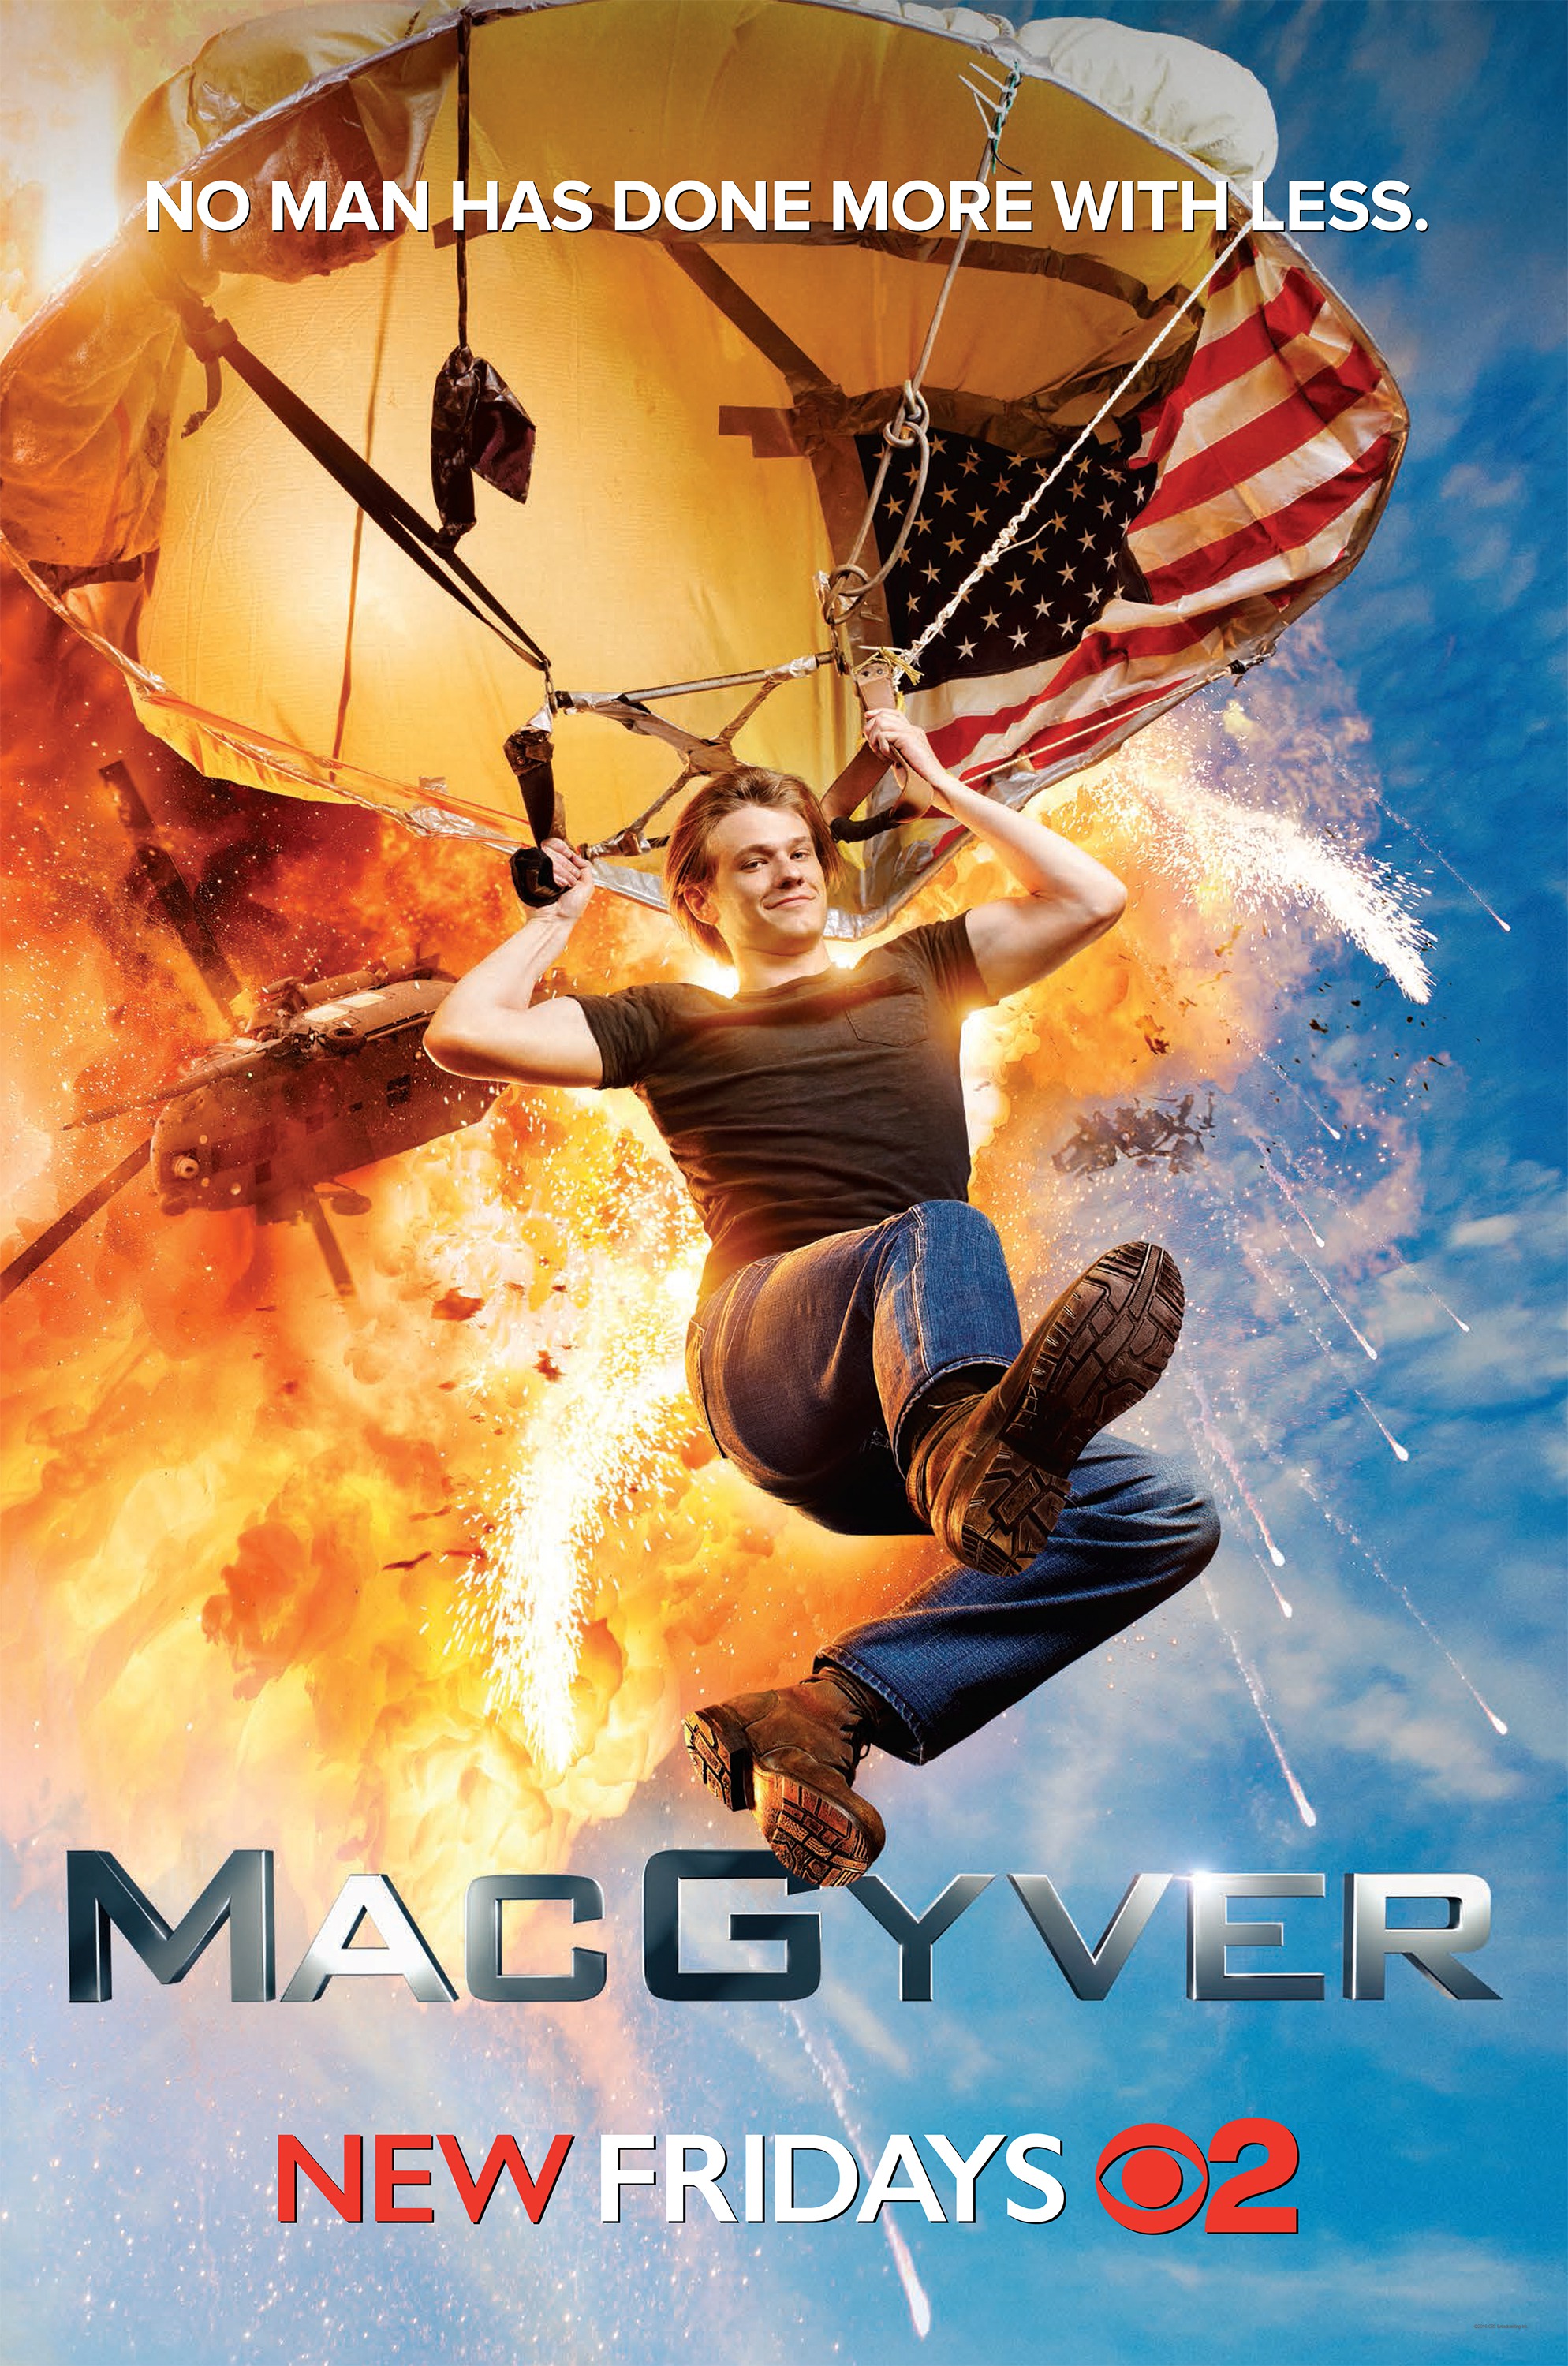 Mega Sized Movie Poster Image for MacGyver 